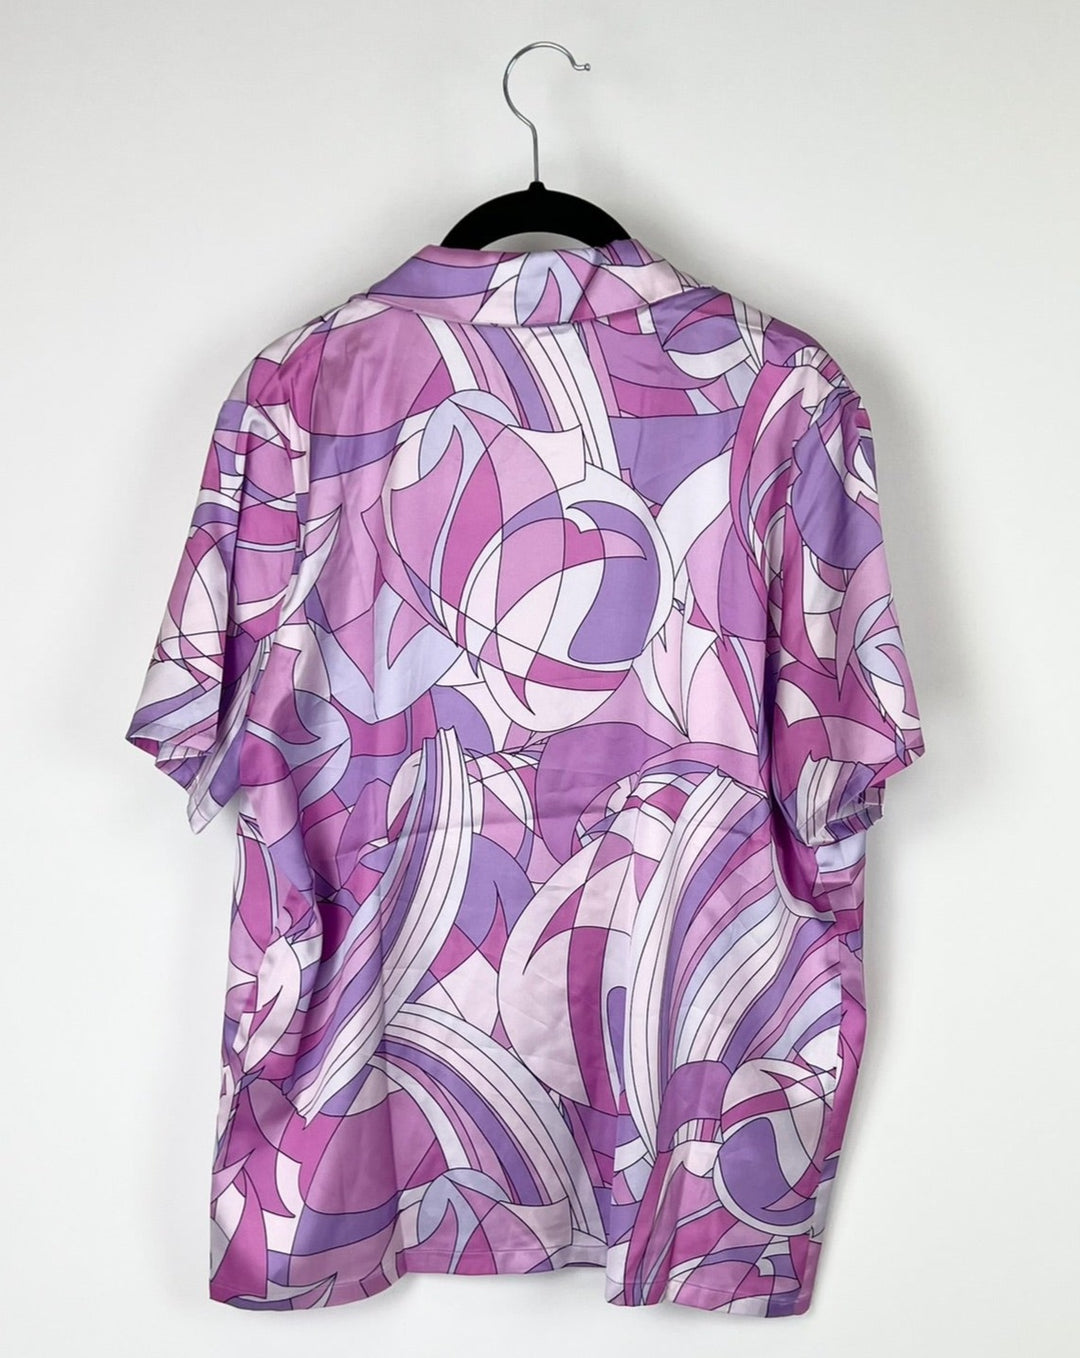 Purple and Pink Abstract Top - Small/Medium